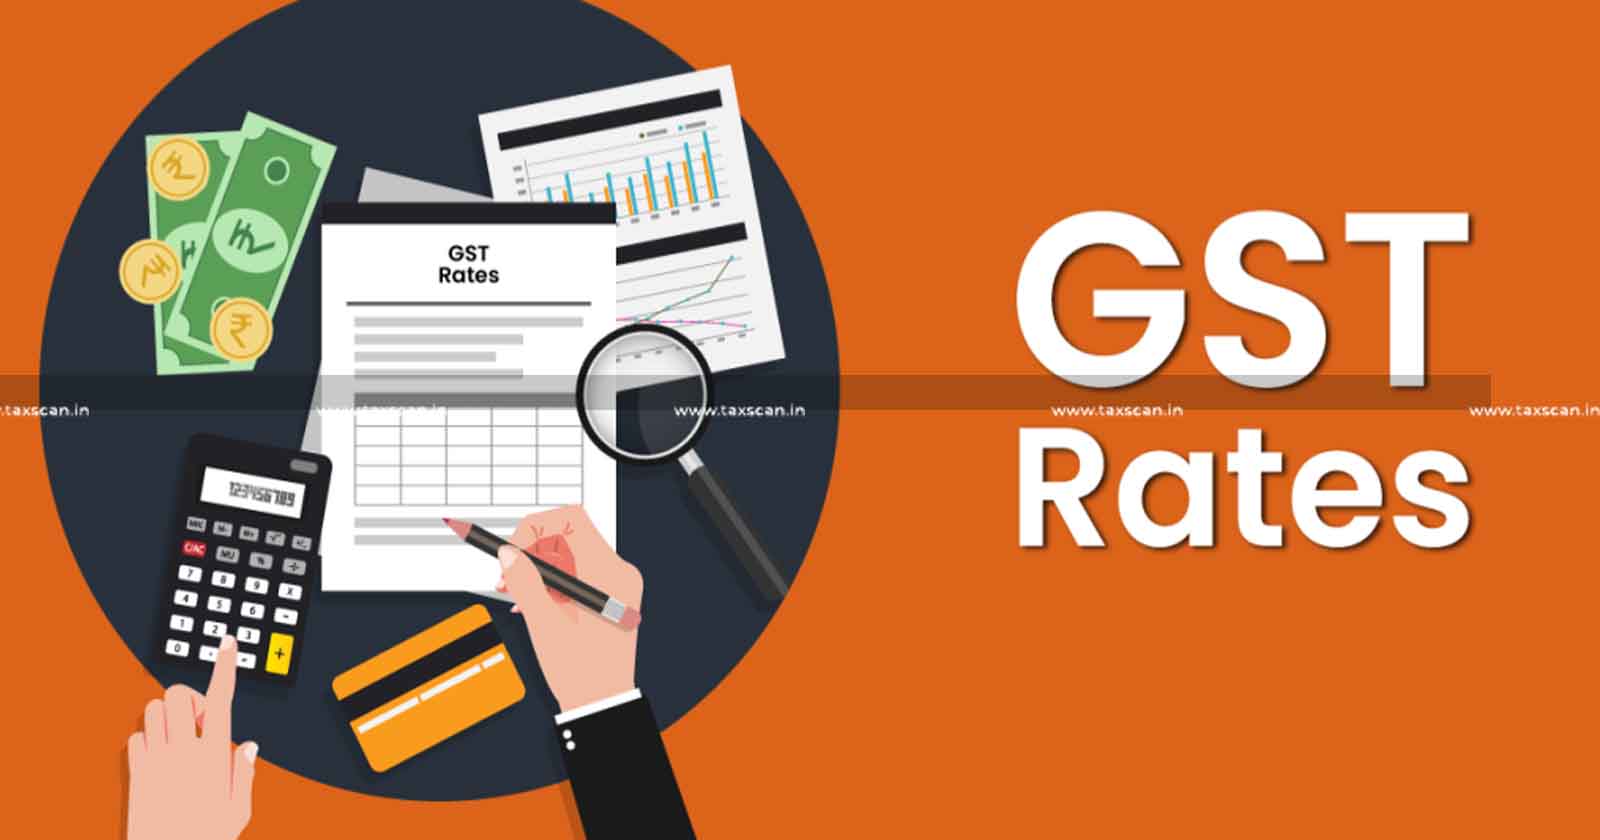 GST Rate Rationalization - Priority for Council - GST - GST Rate - Rationalization - taxscan